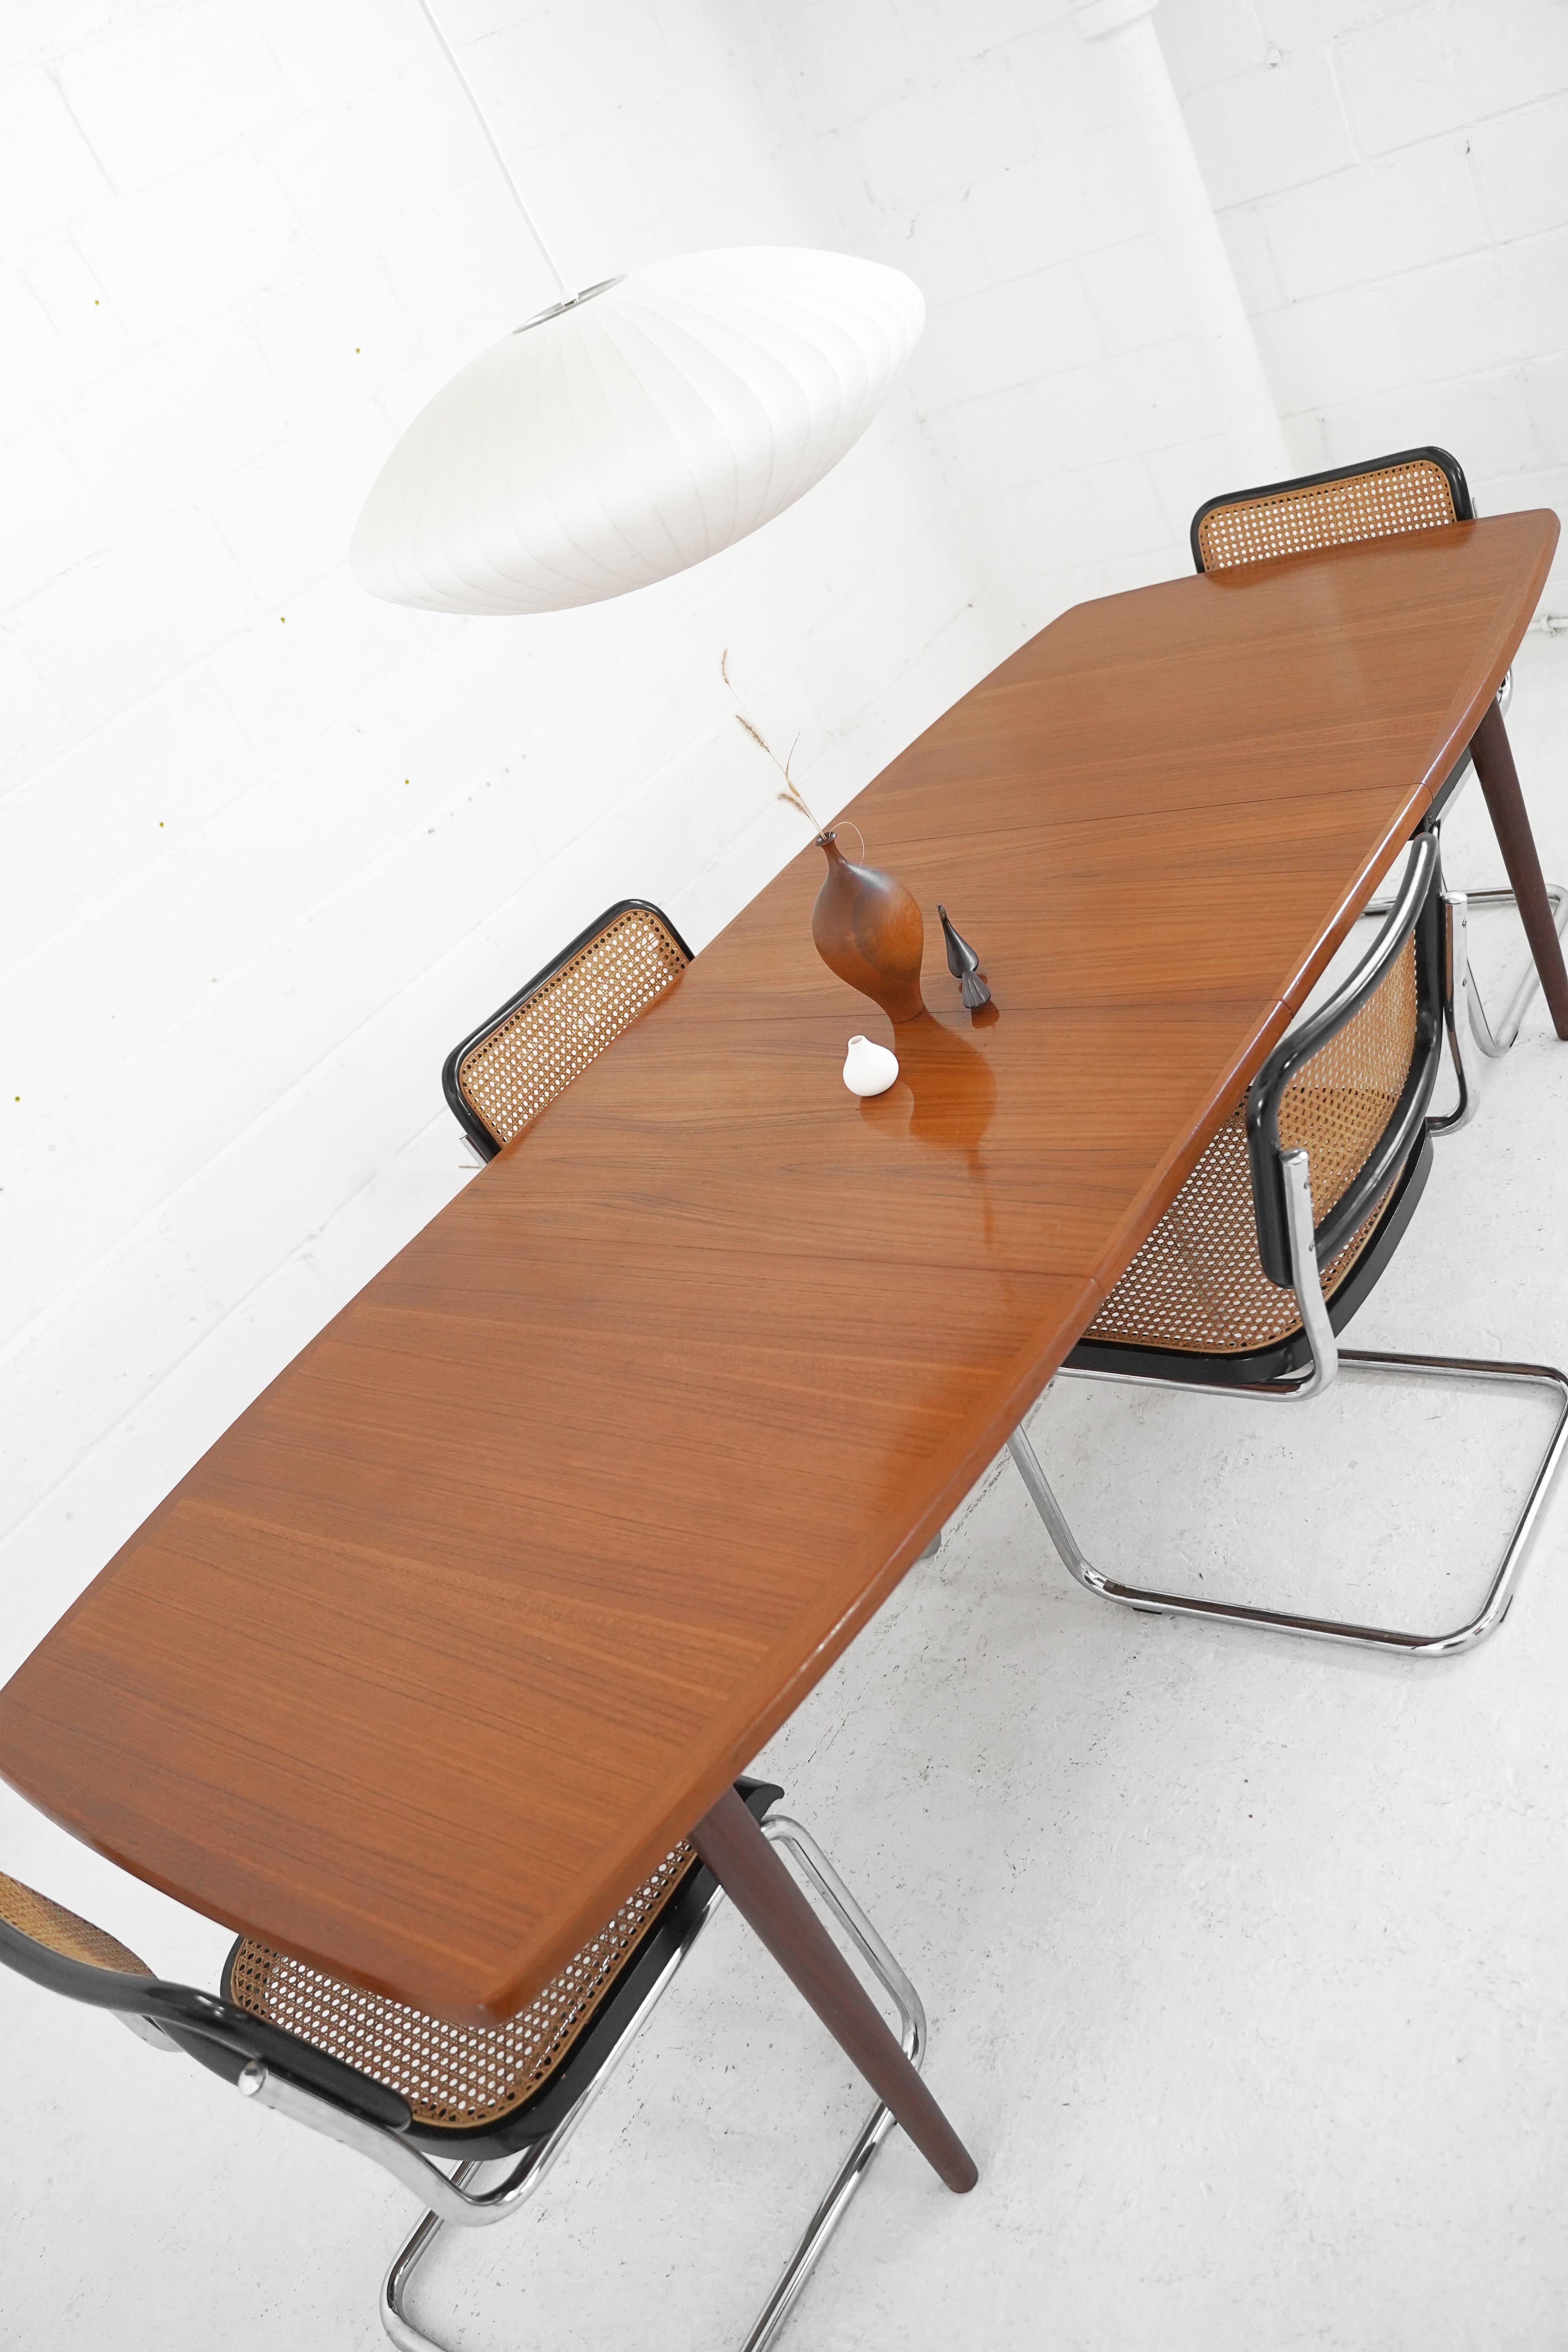 Teak Dining Table with Extension Leaves by Alf Aarseth for Gustav Bahus 4